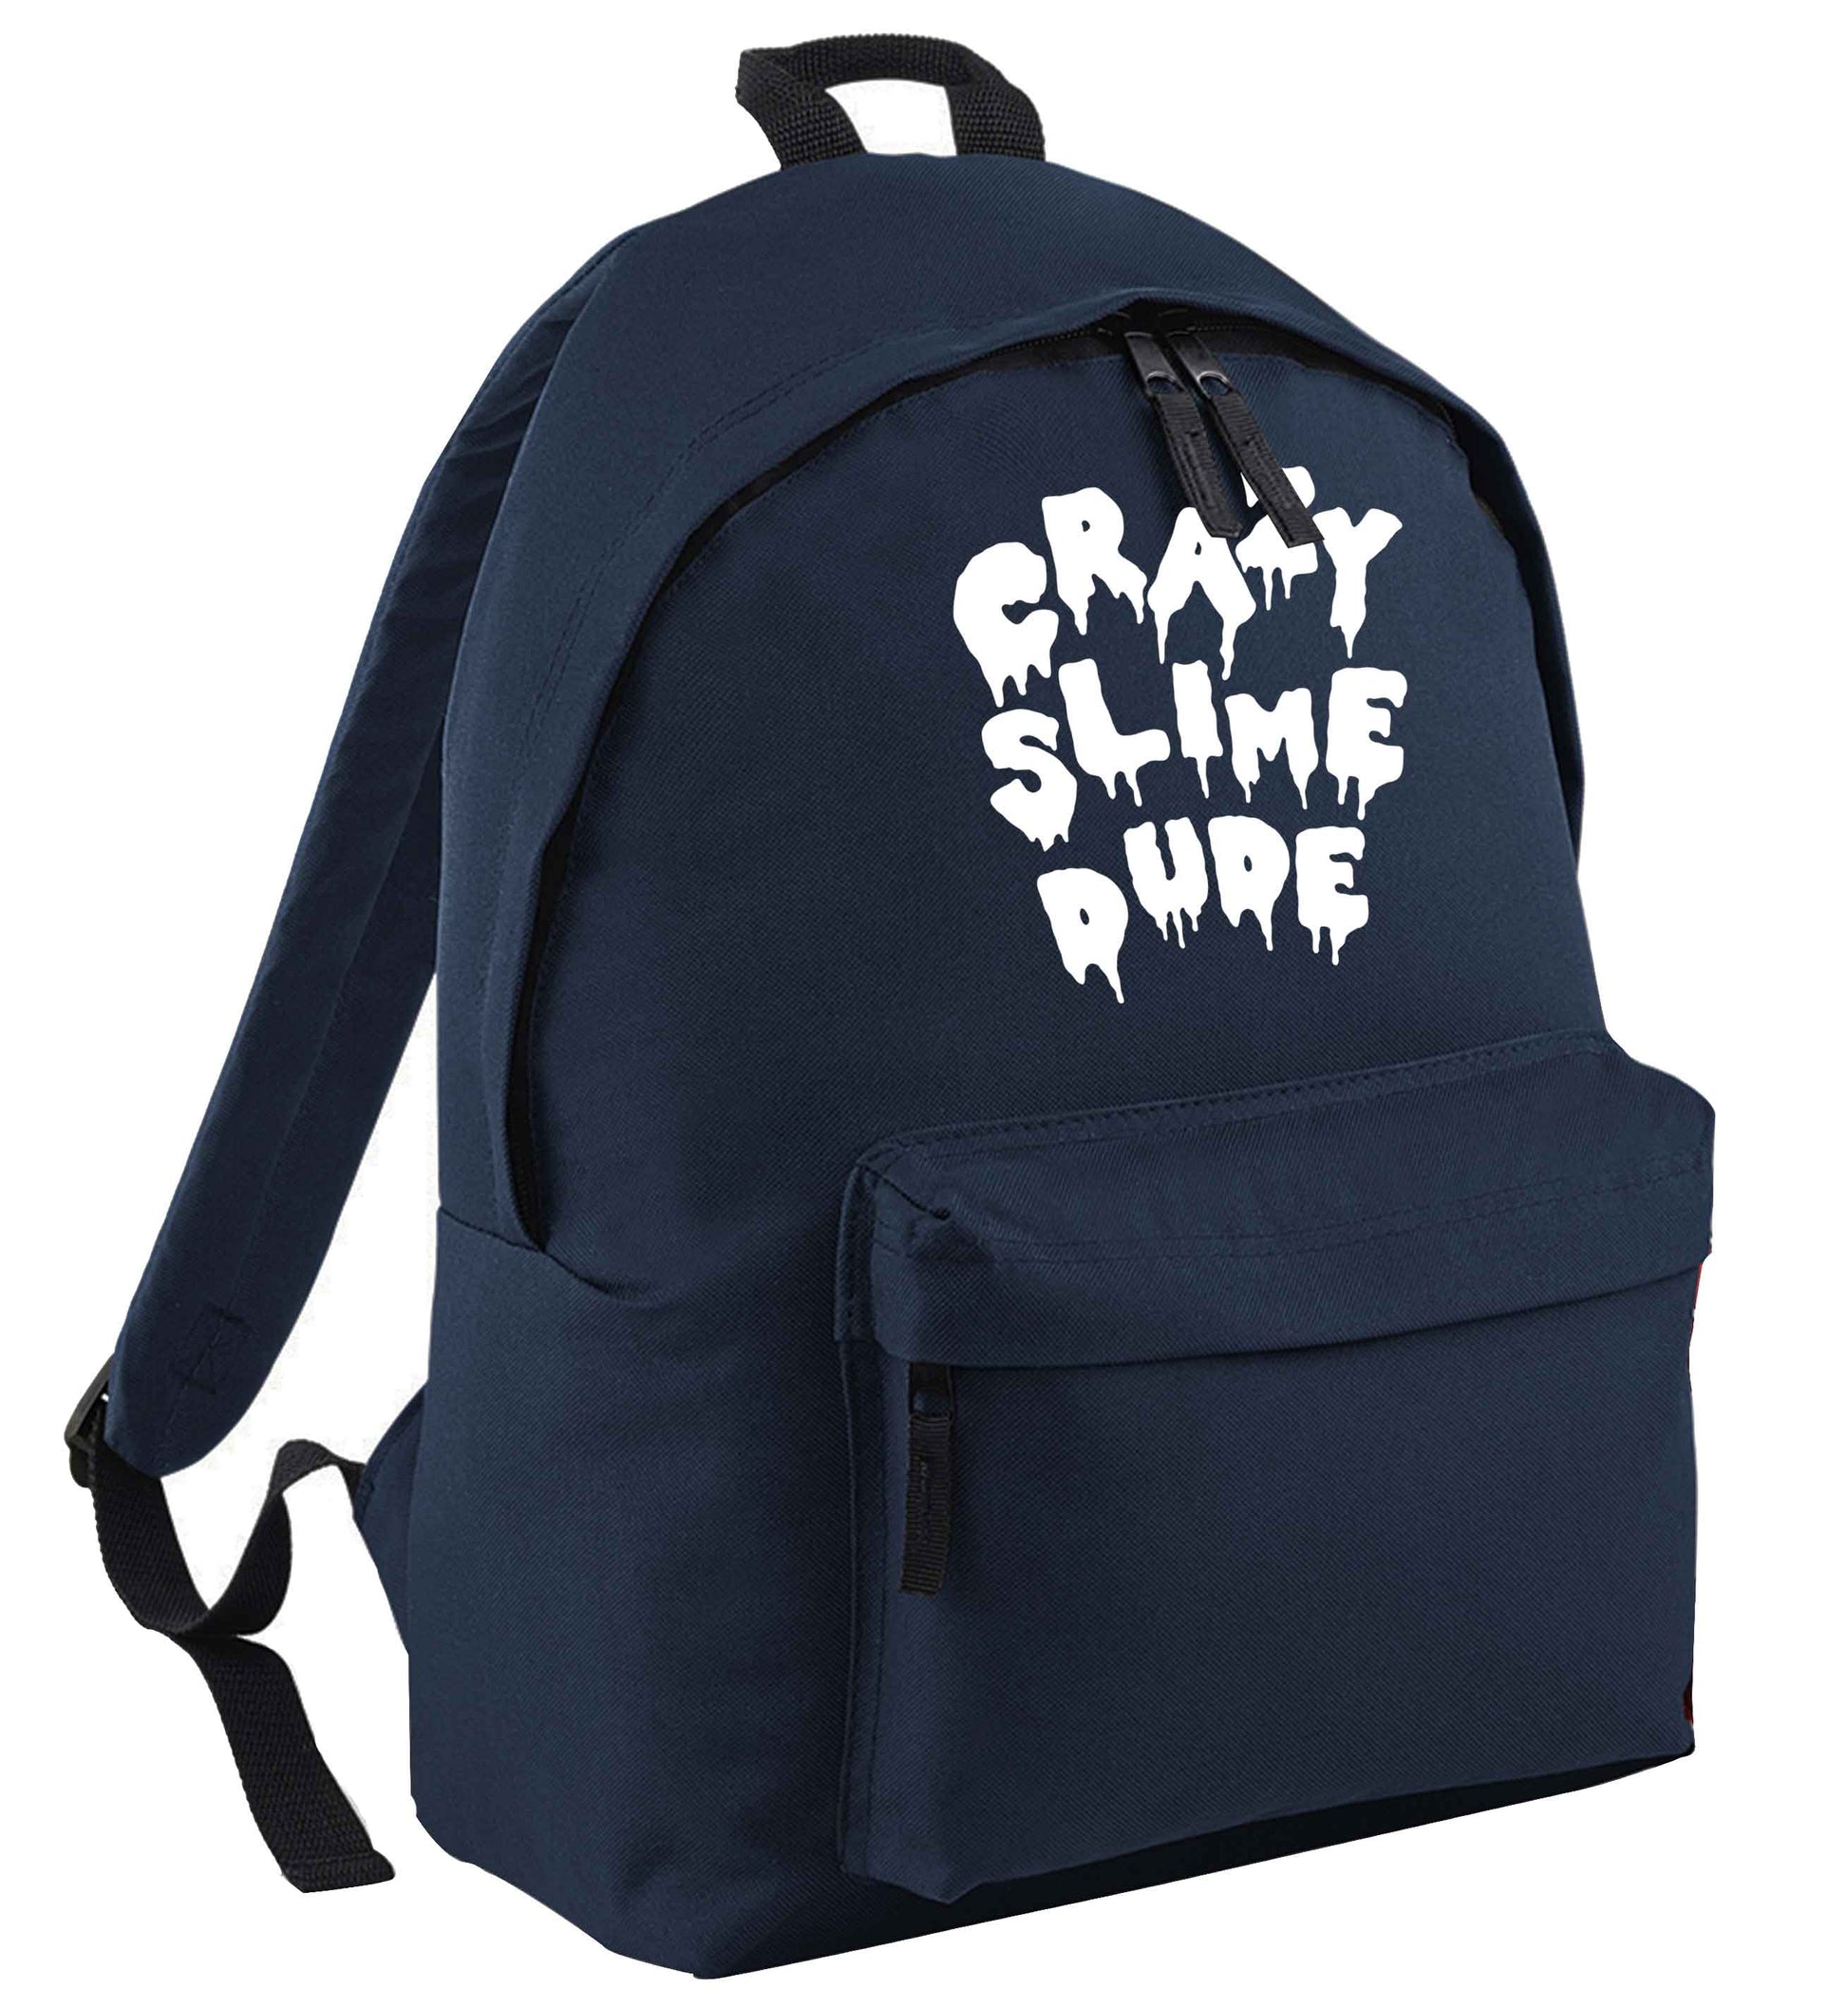 Crazy slime dude navy adults backpack